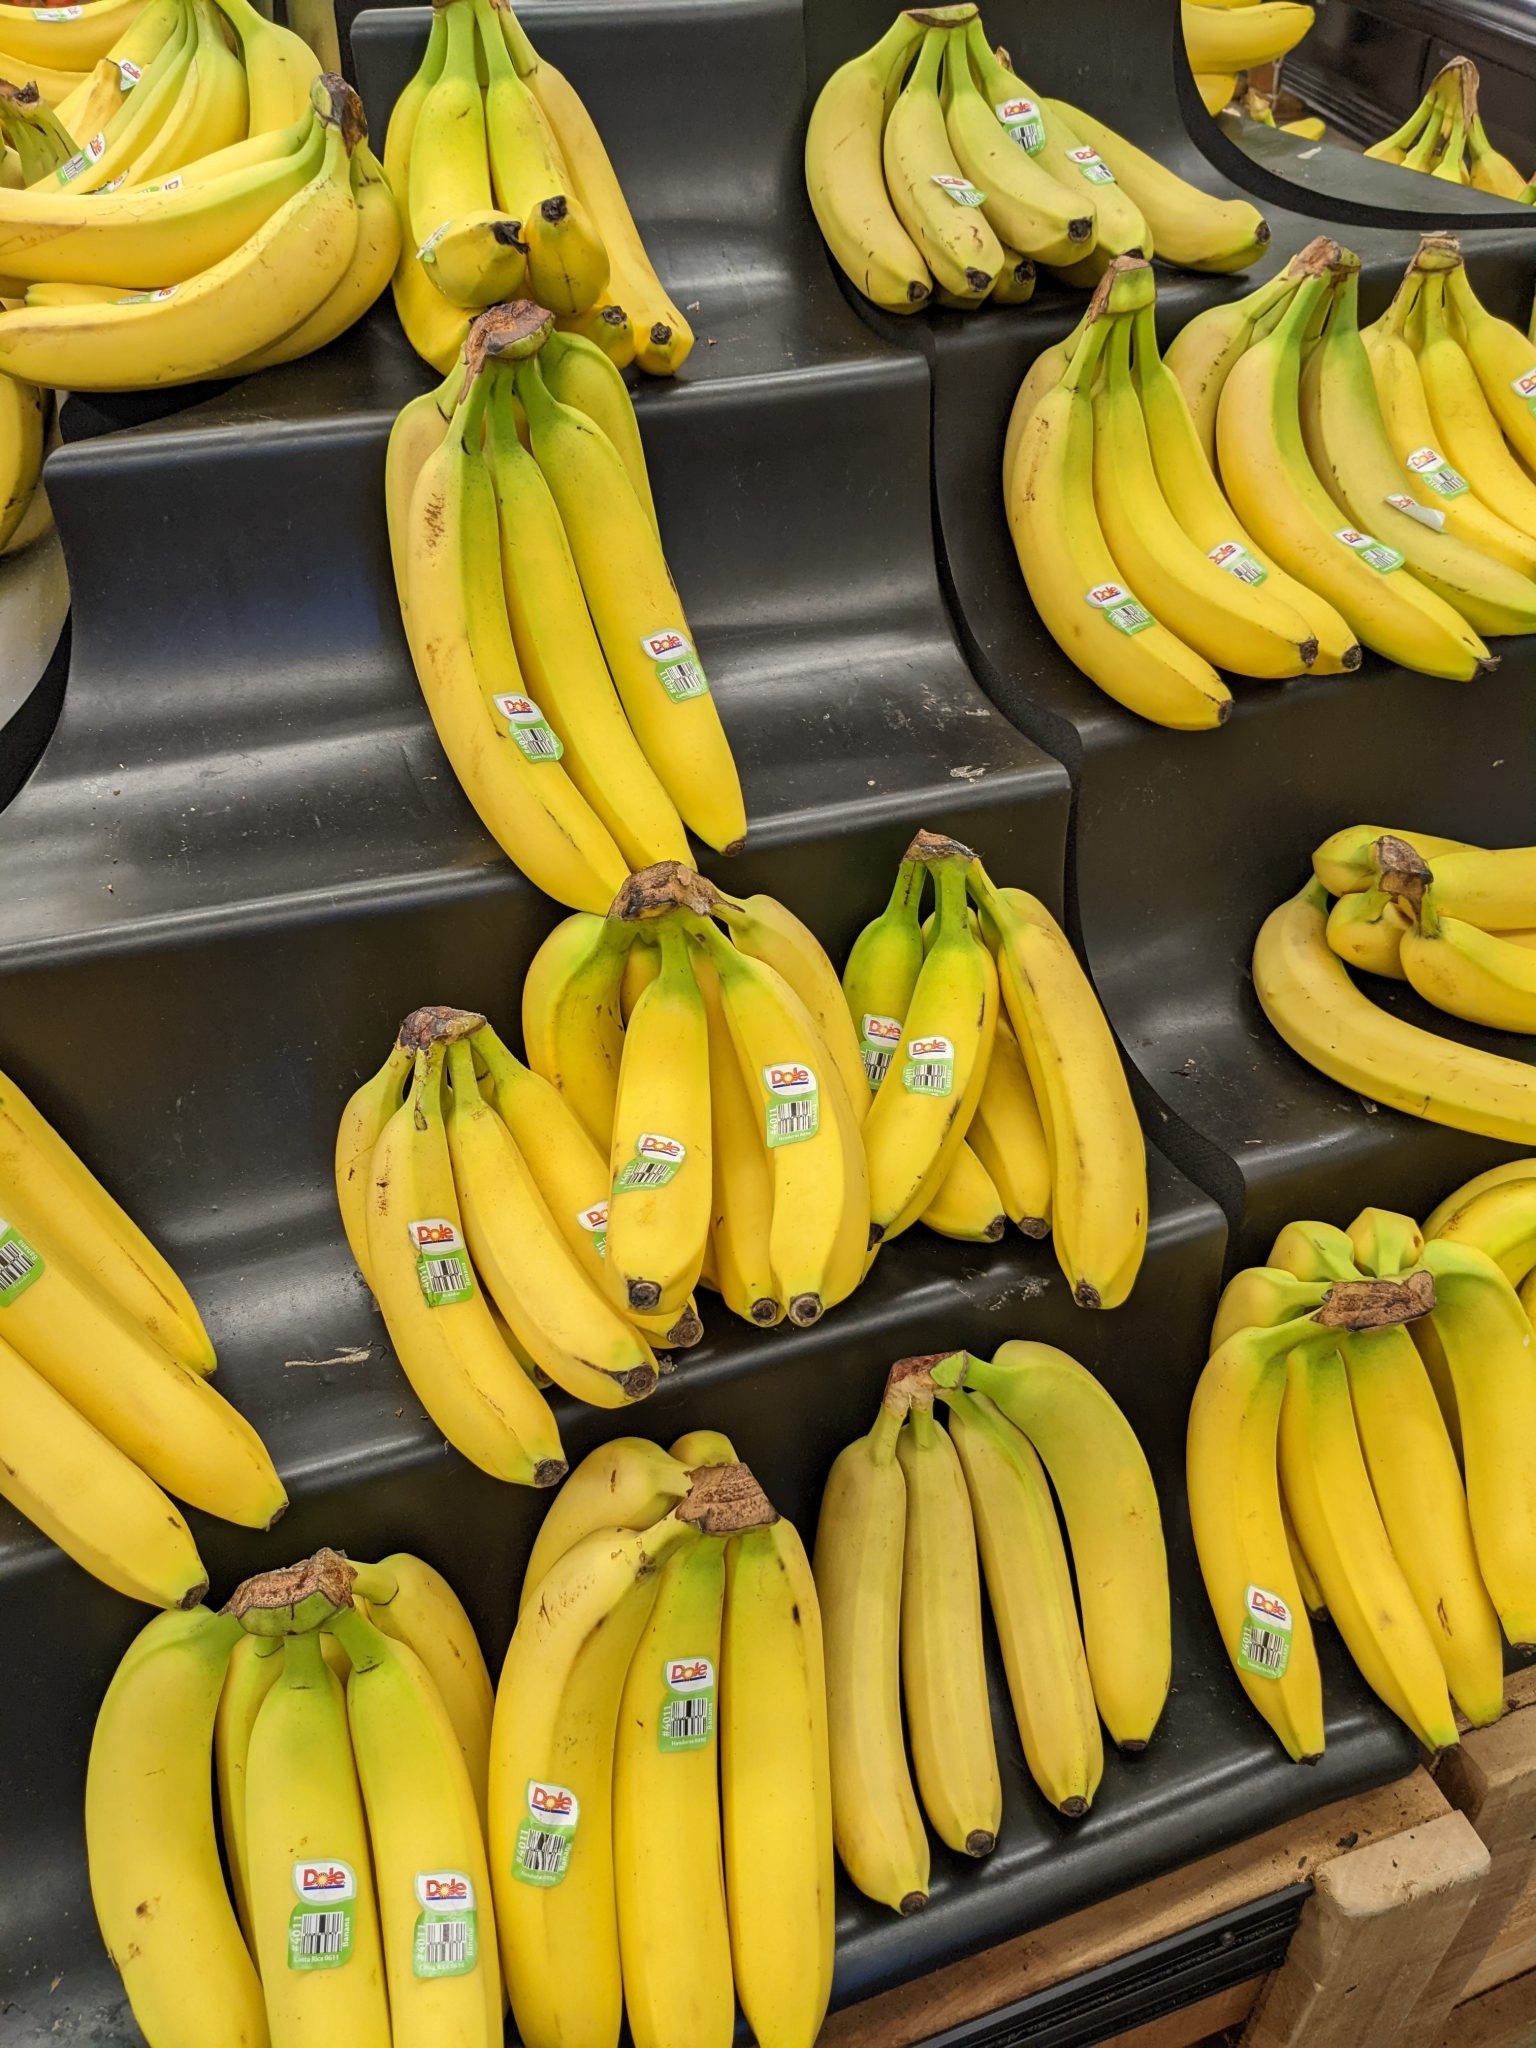 Several bunches of bananas on shelves in a store